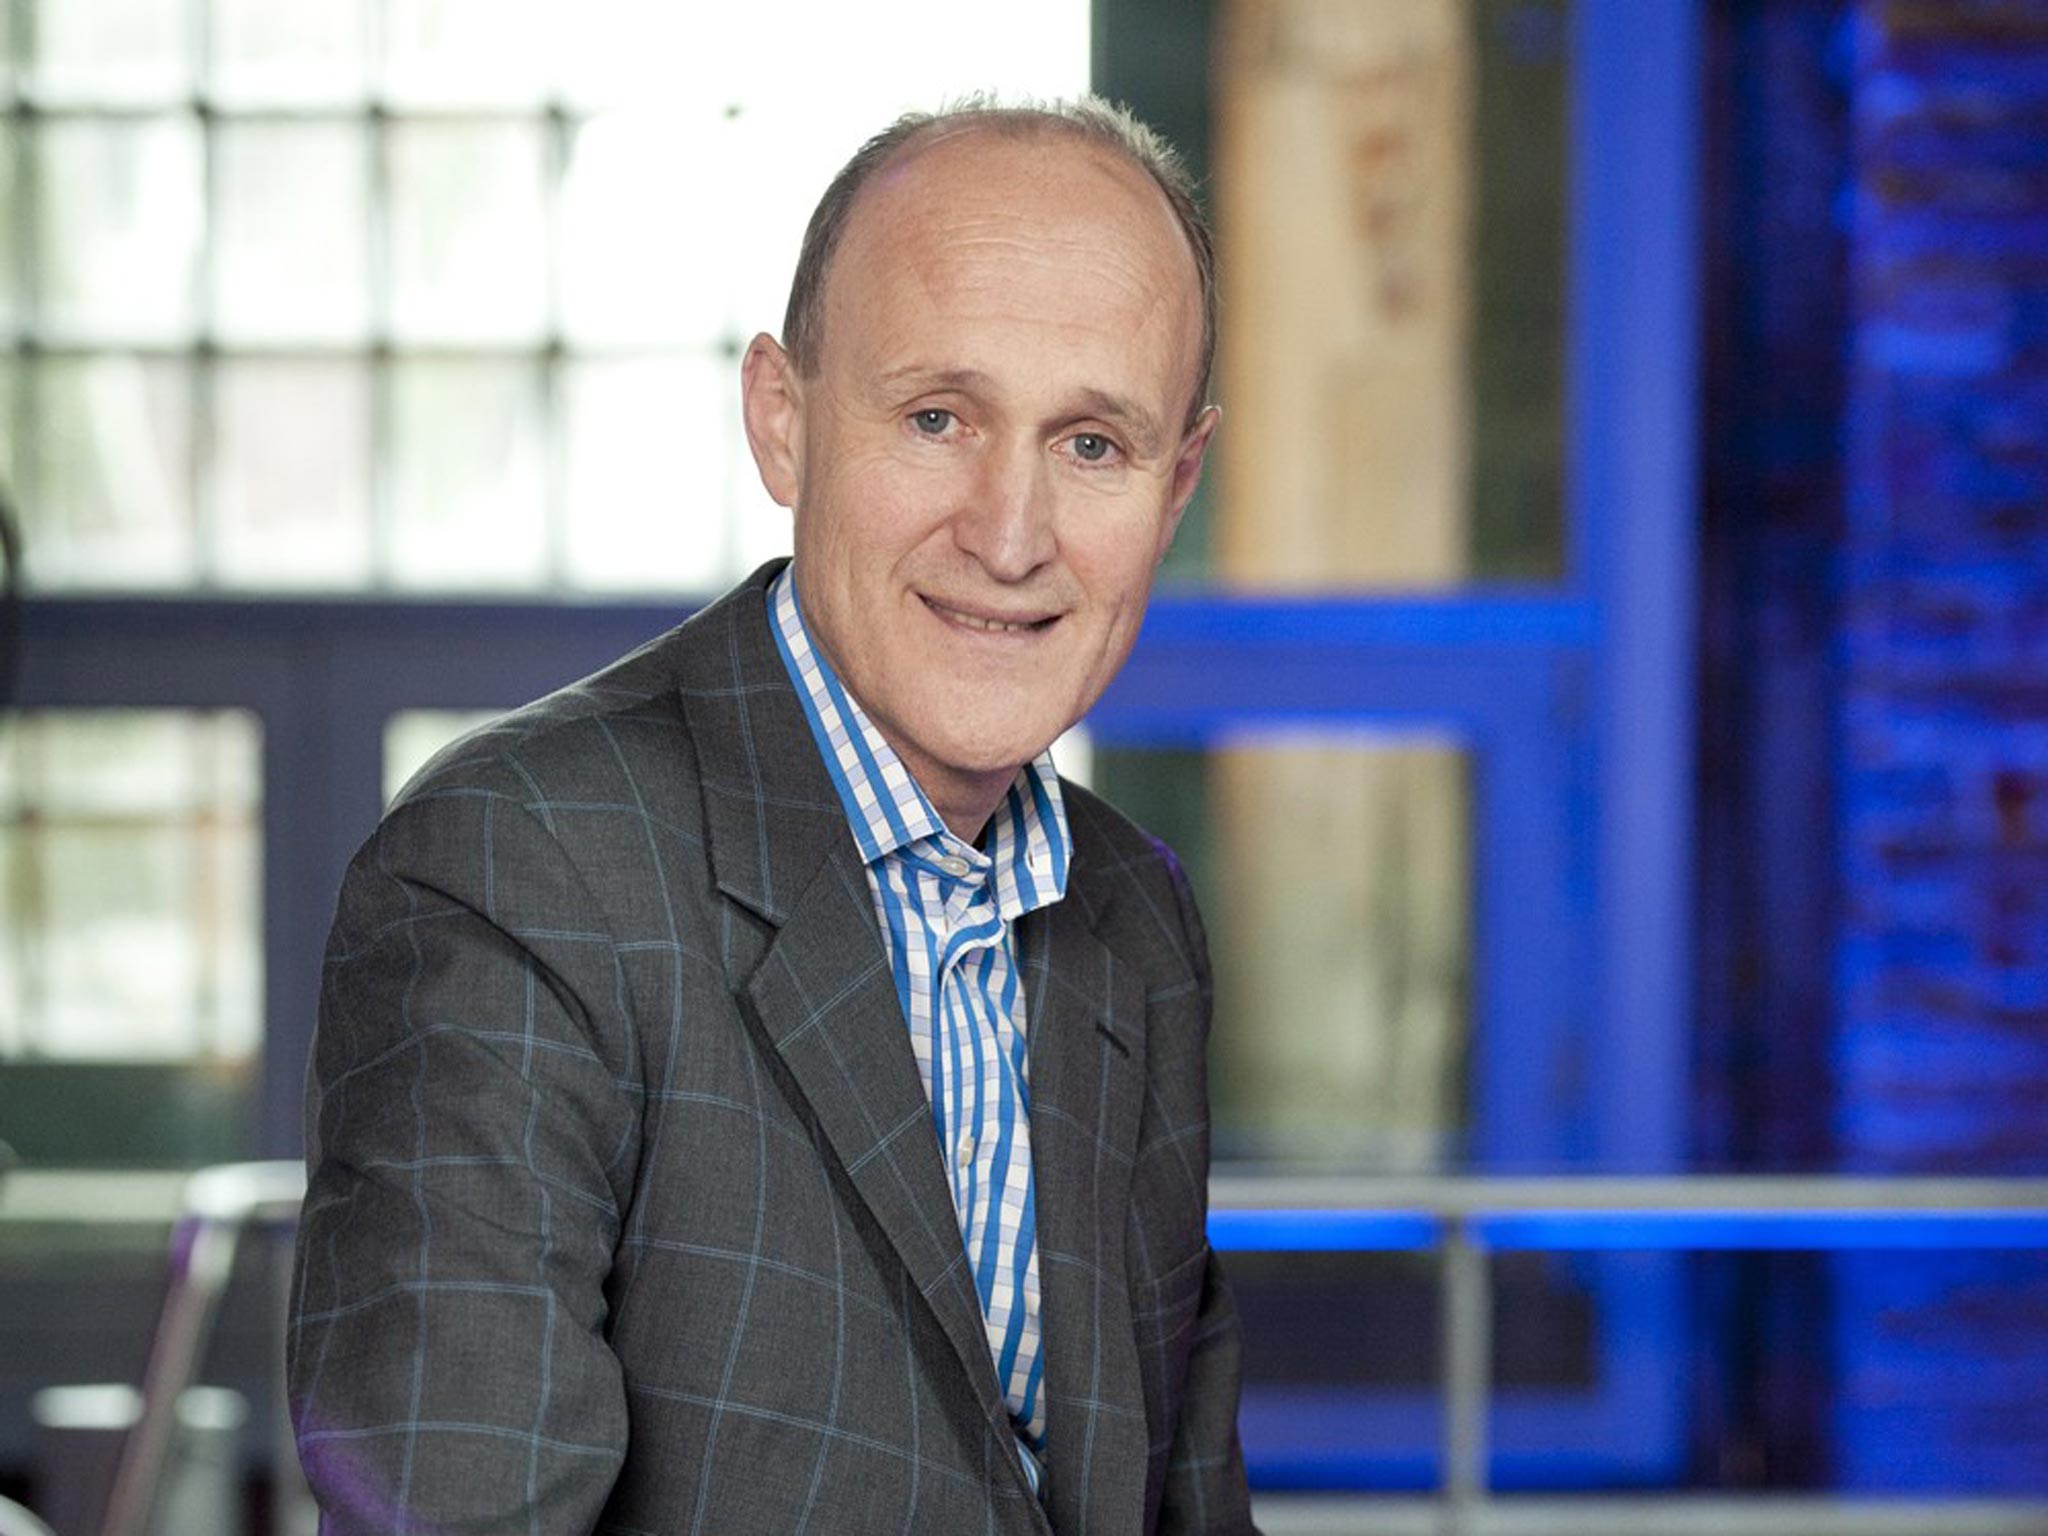 Sir Peter Bazalgette has called for state schools to add study of the arts to the so-called “Stem” subjects